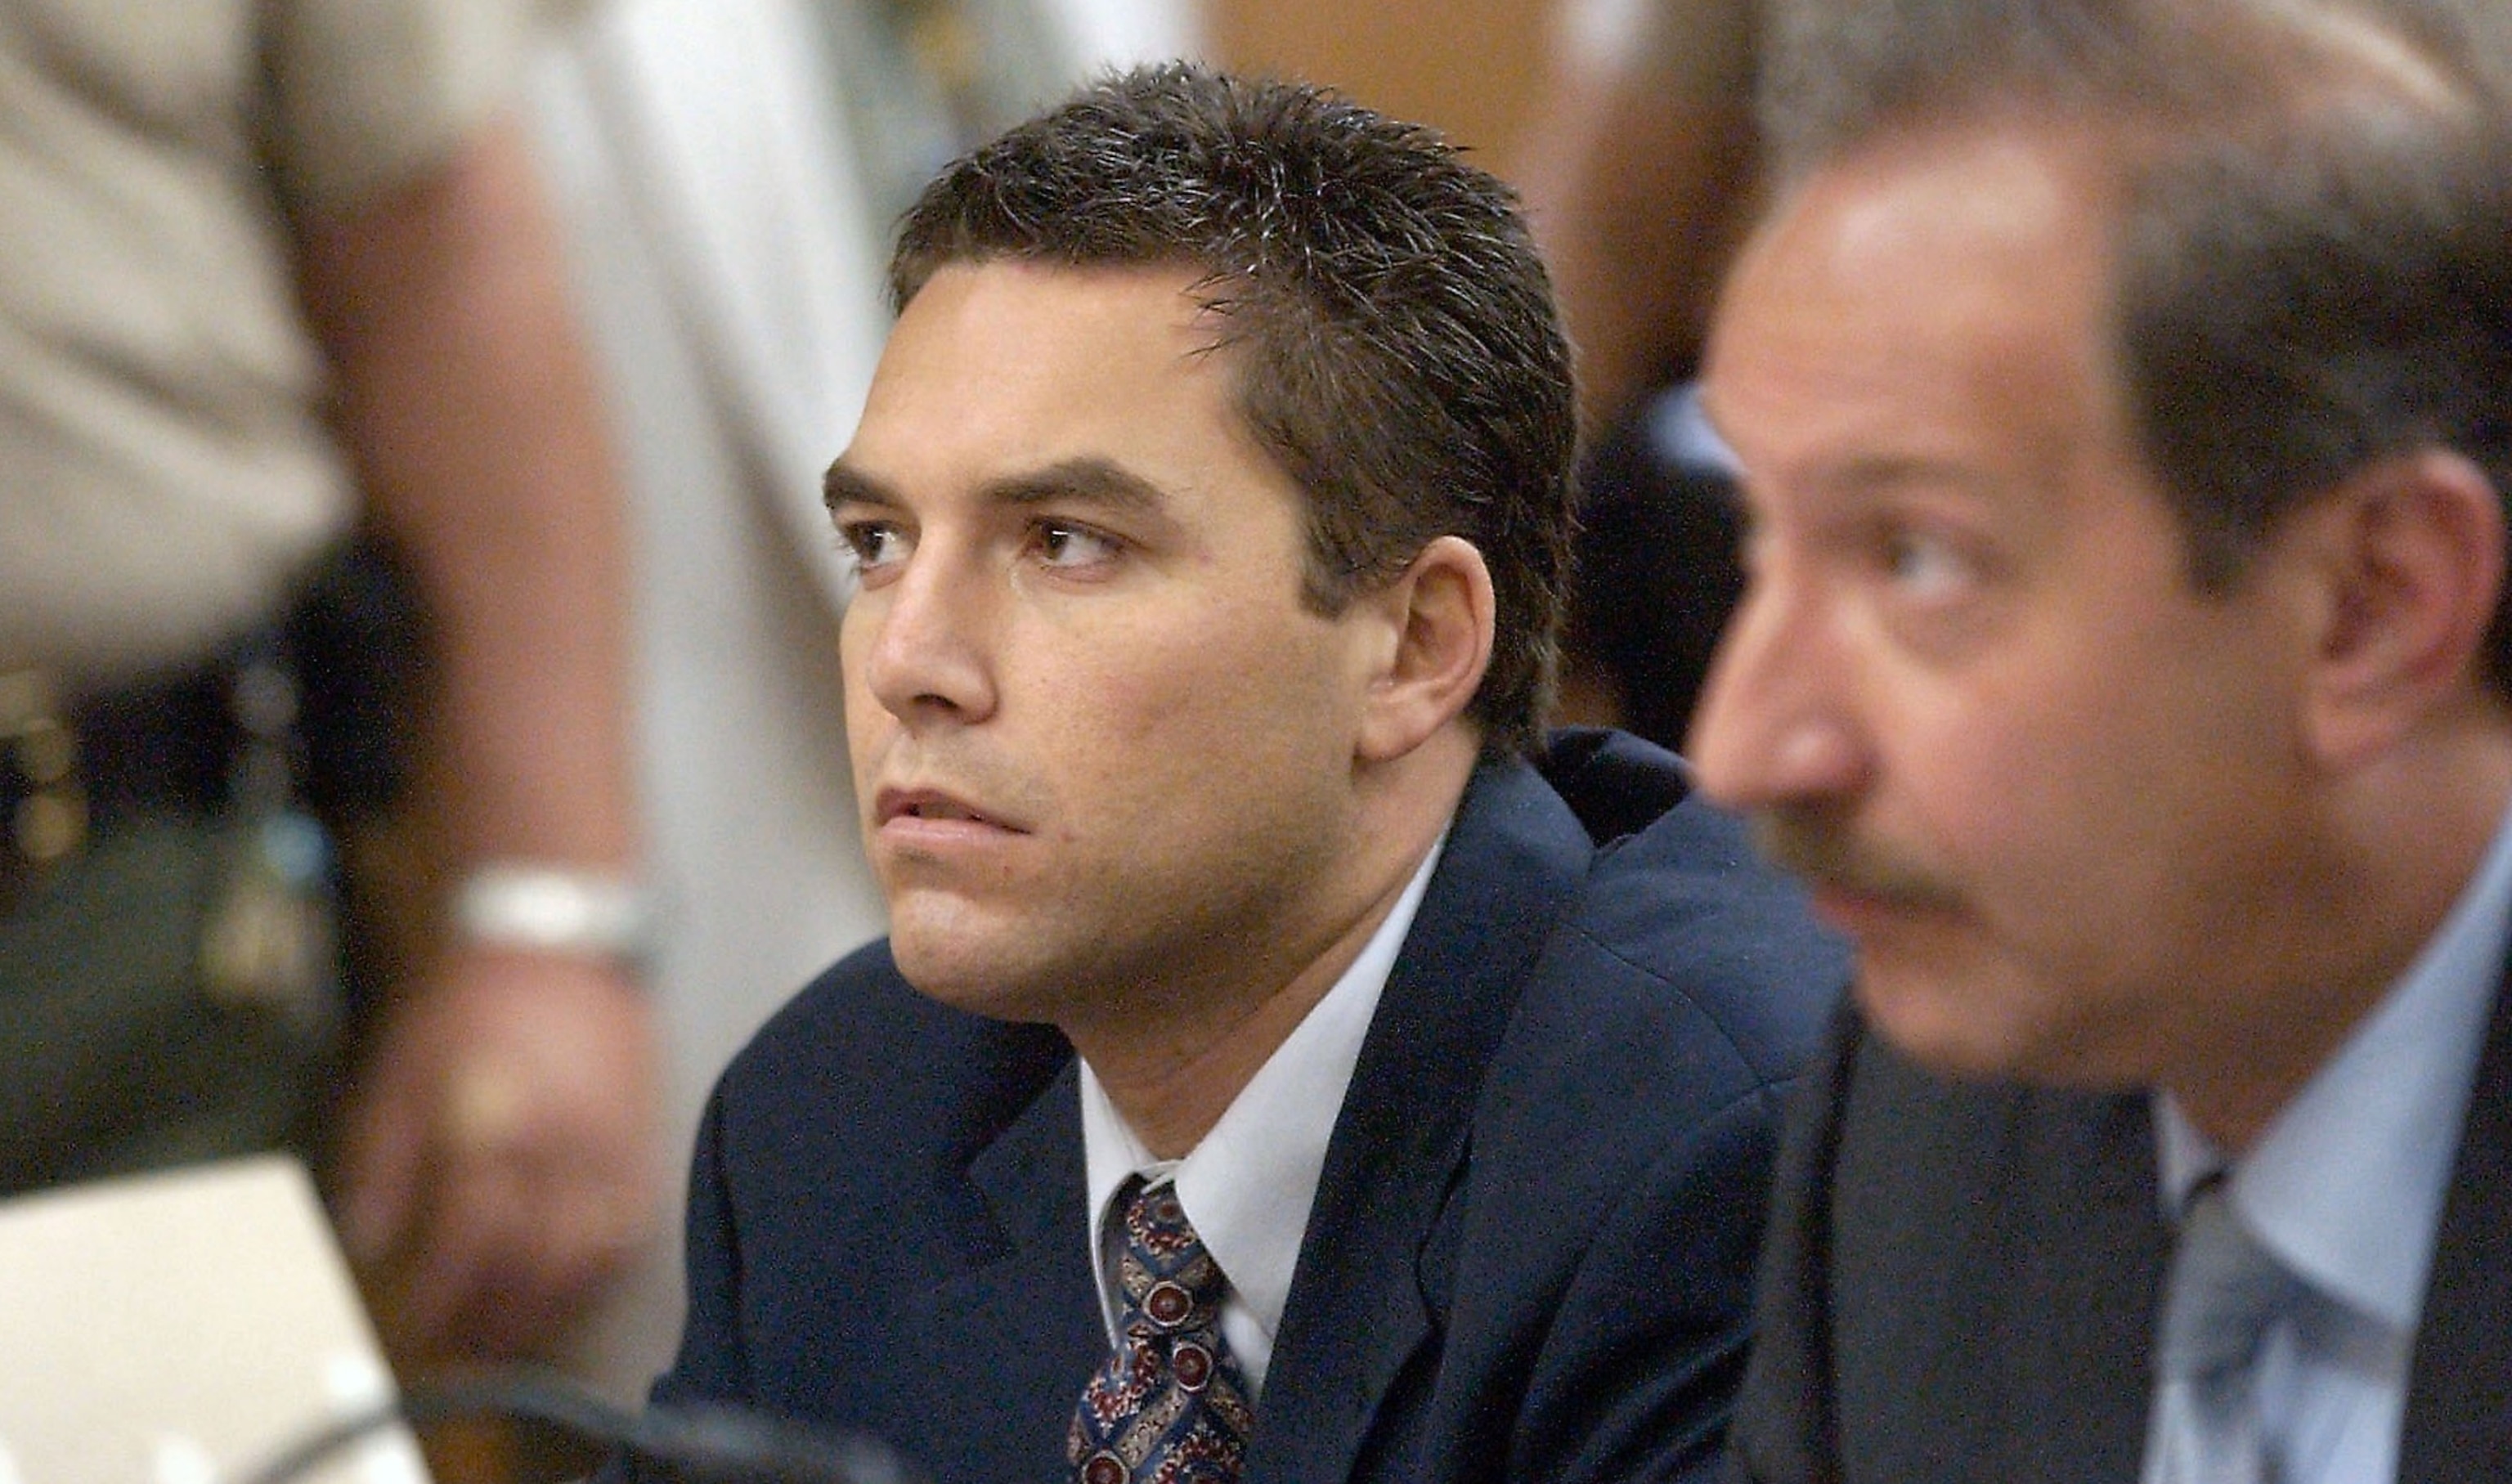 PHOTO: In this July 9, 2003, file photo, Scott Peterson listens during a pretrial hearing in Stanislaus Superior Court, in Modesto, Calif.